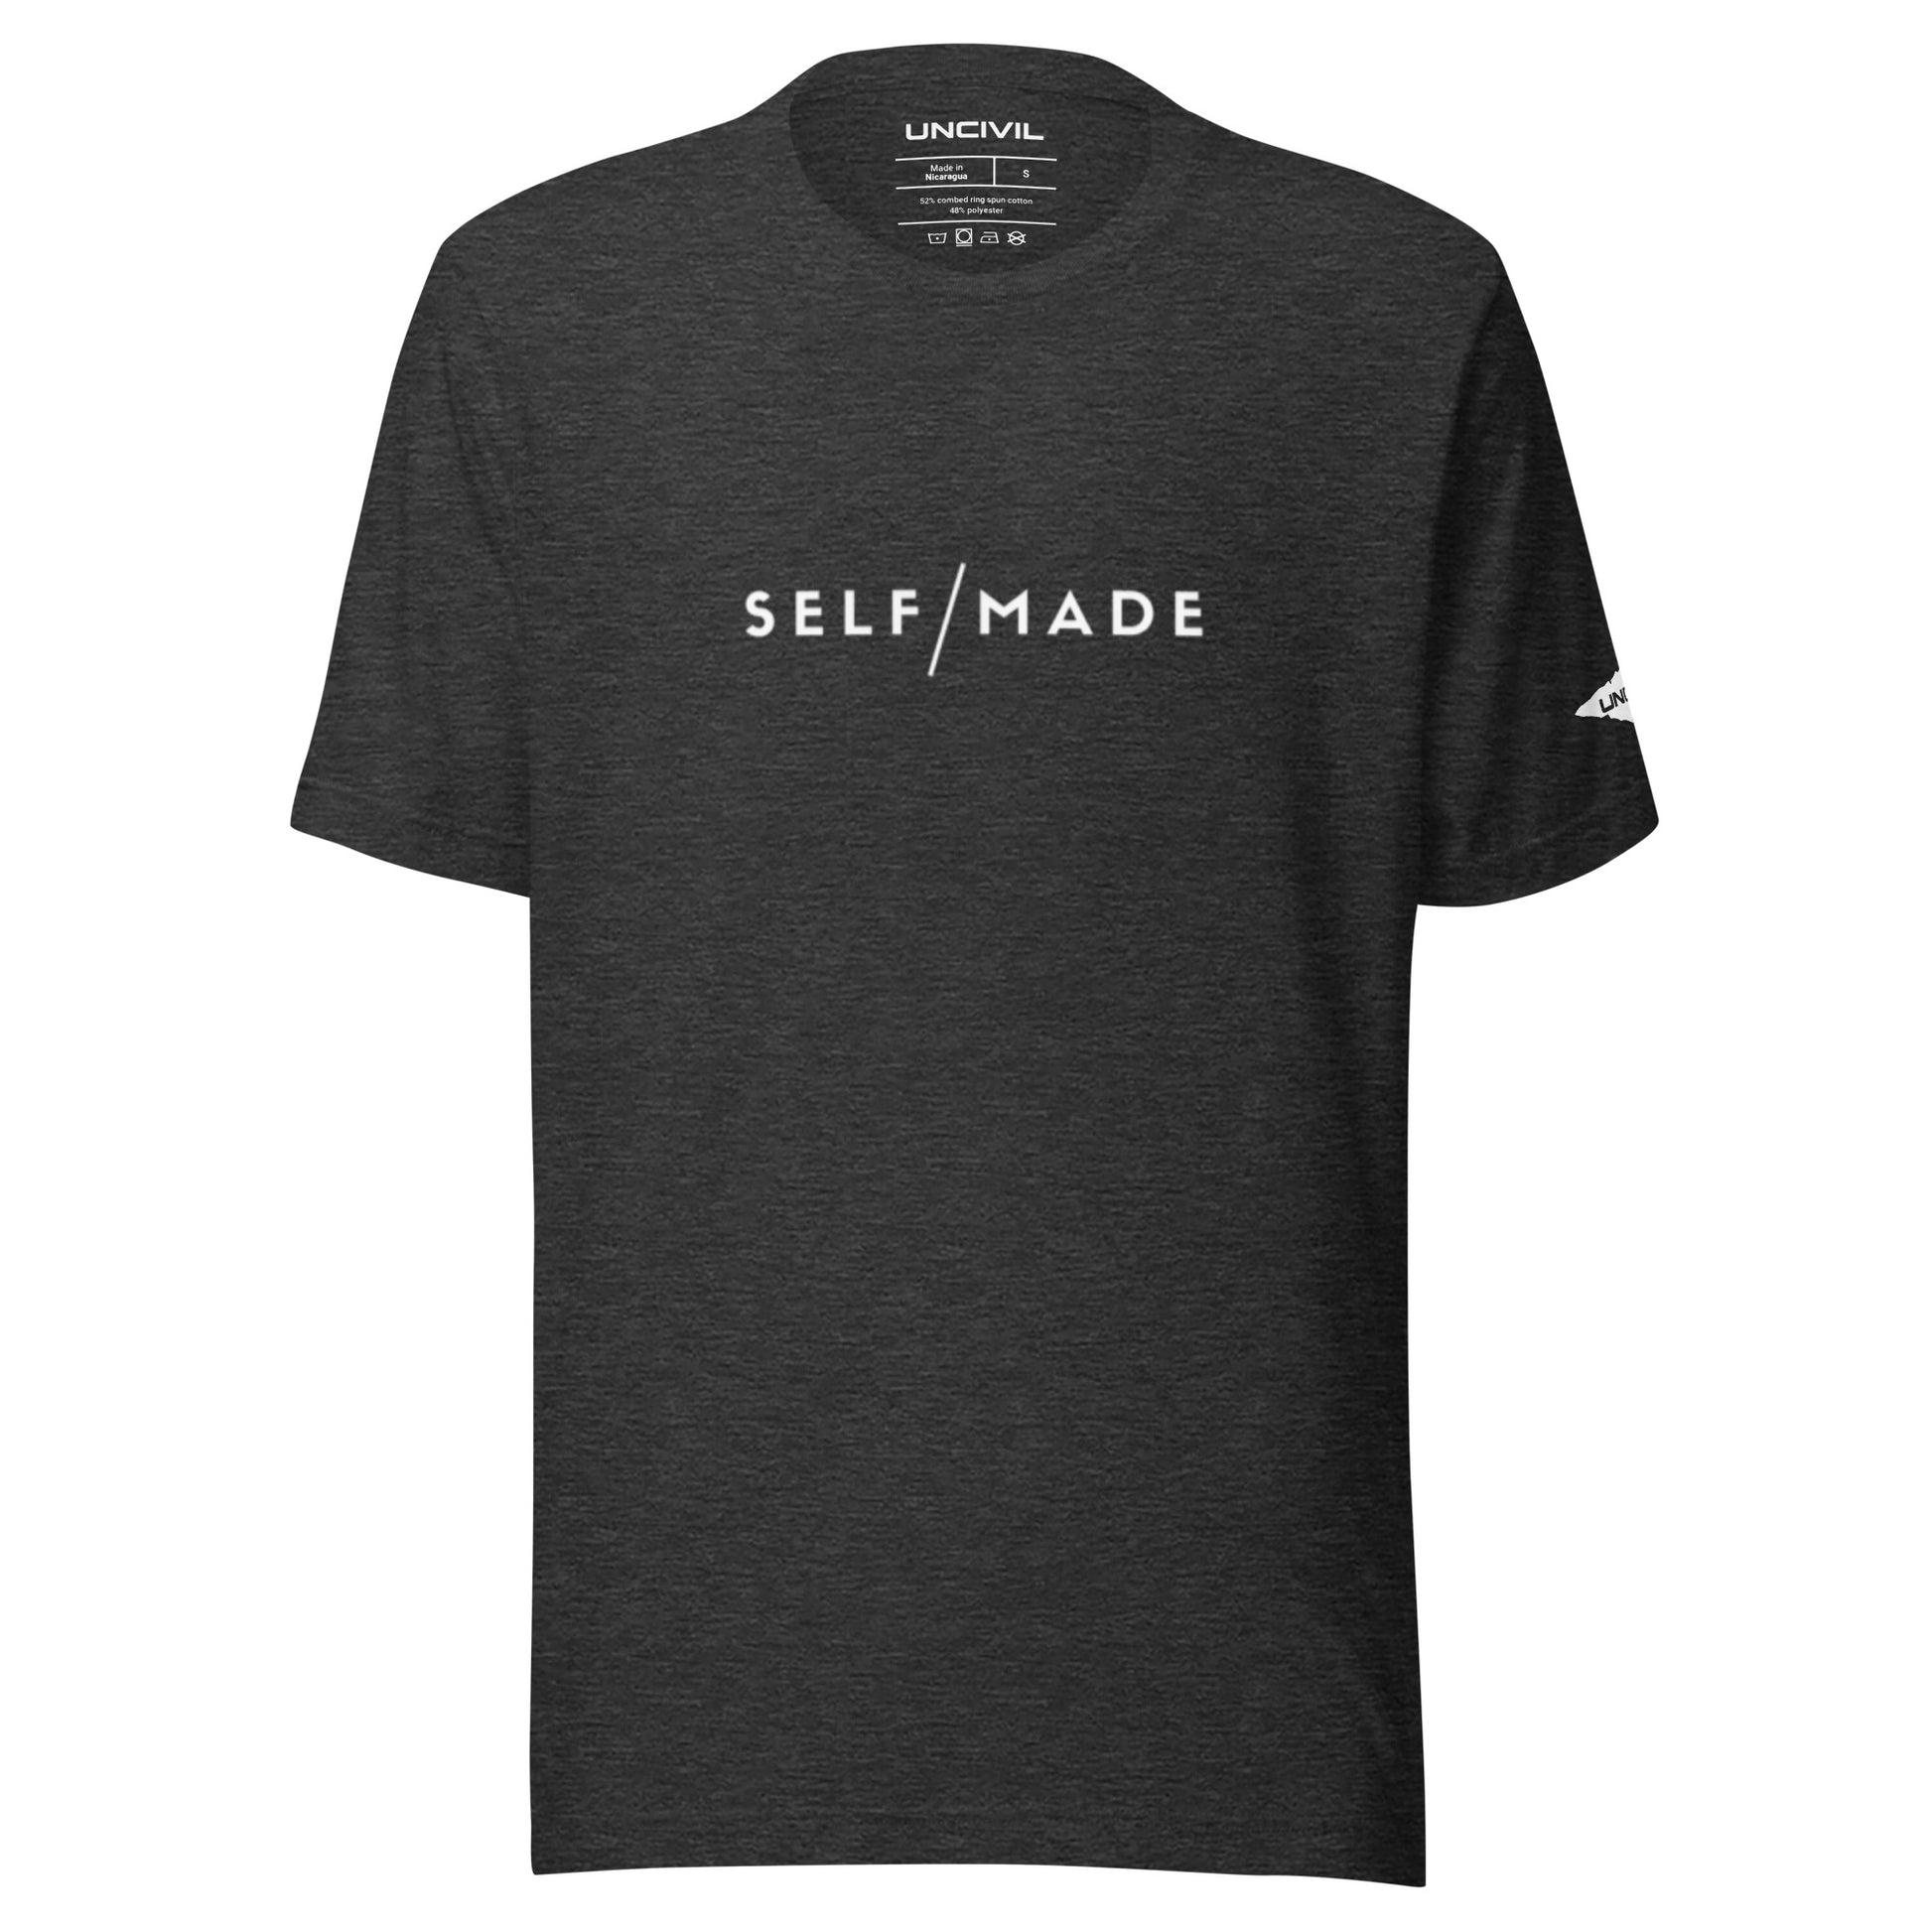 Our Self/Made UNCIVIL lifestyle shirt embodies empowerment and resilience. Dark Grey Heather unisex shirt.